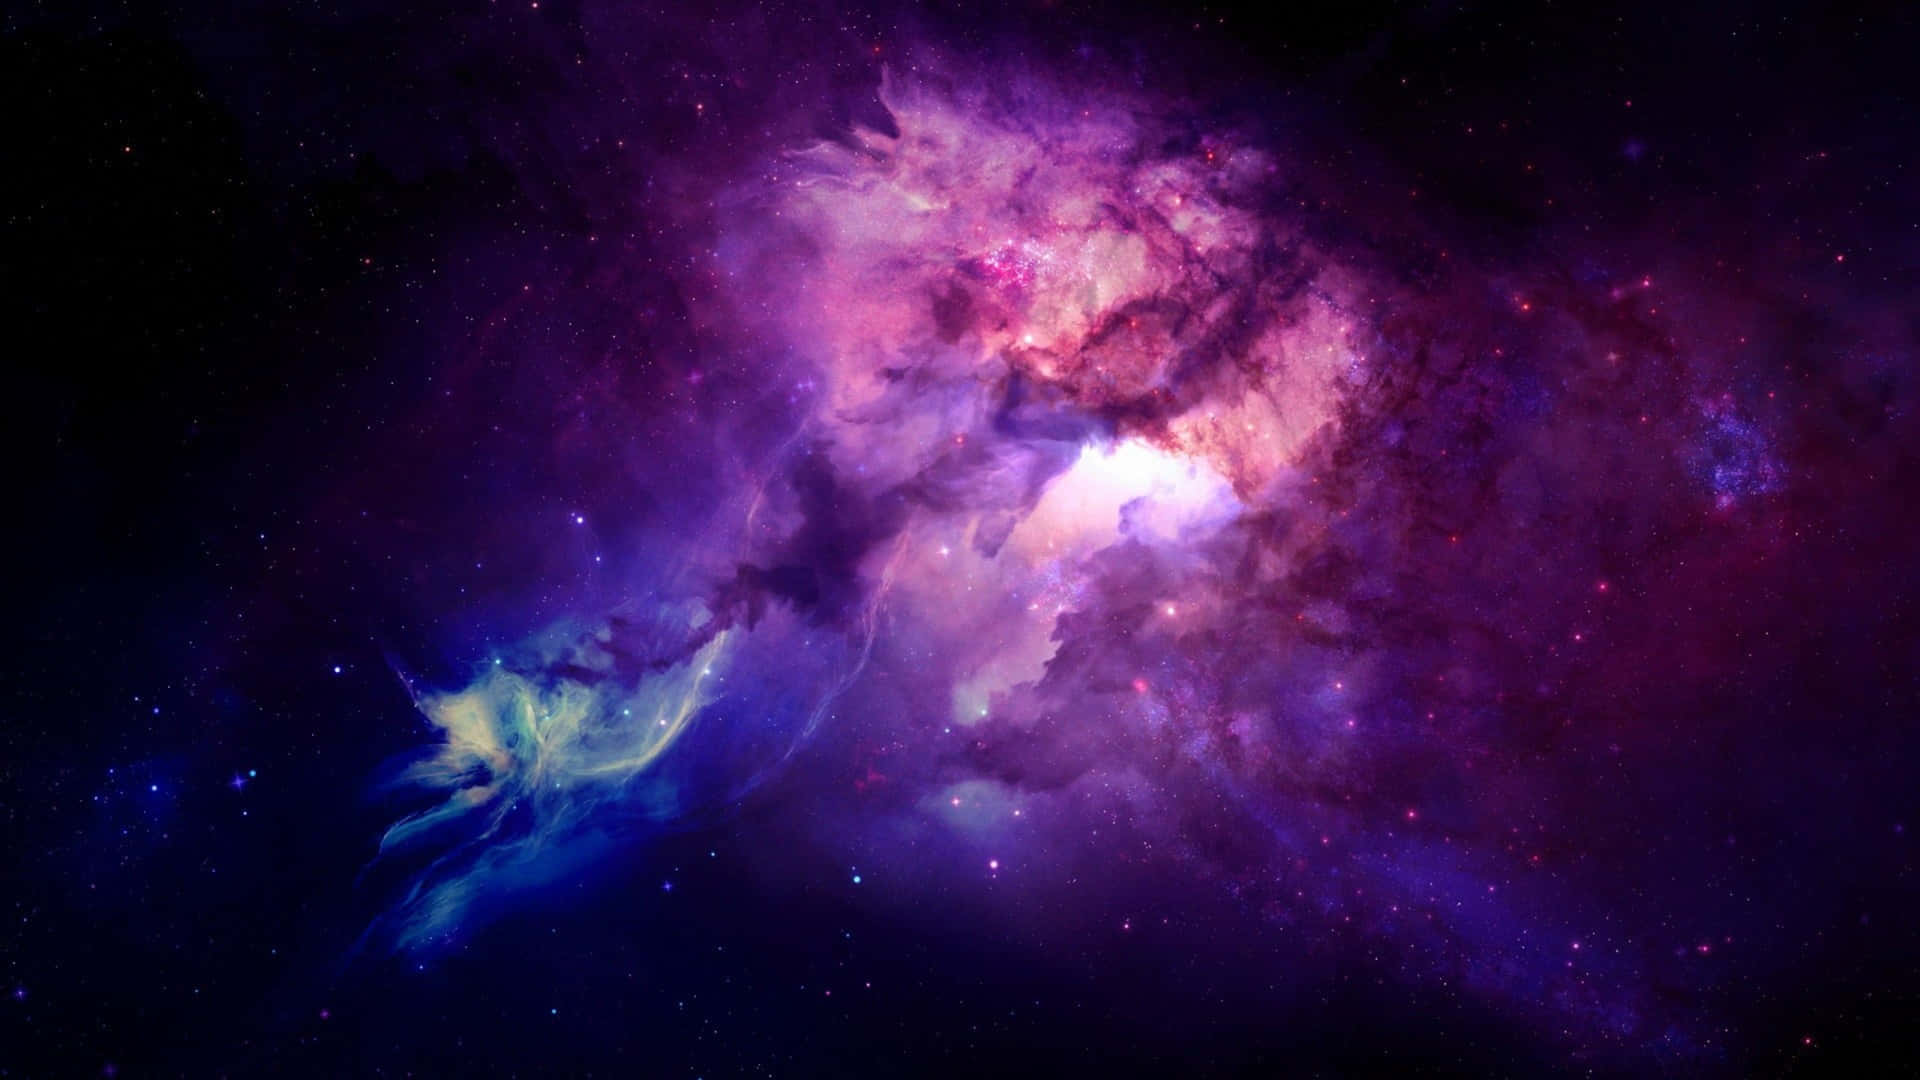 "Witness the beauty of the black and purple galaxy" Wallpaper